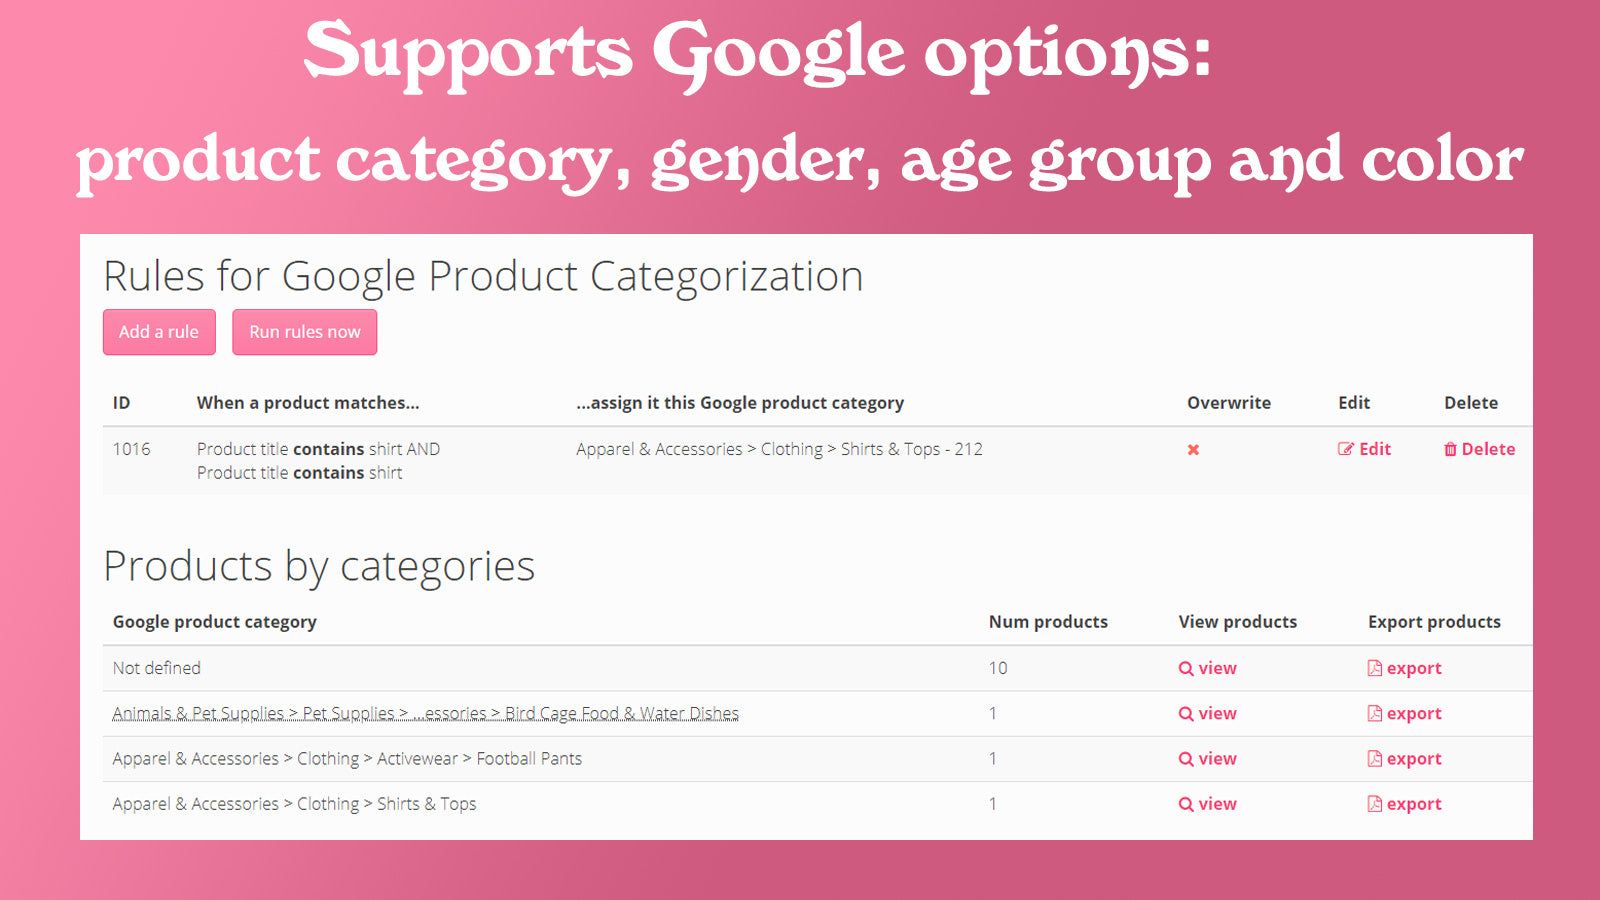 Export Google Product Categories, Age Groups, Genders and Colors